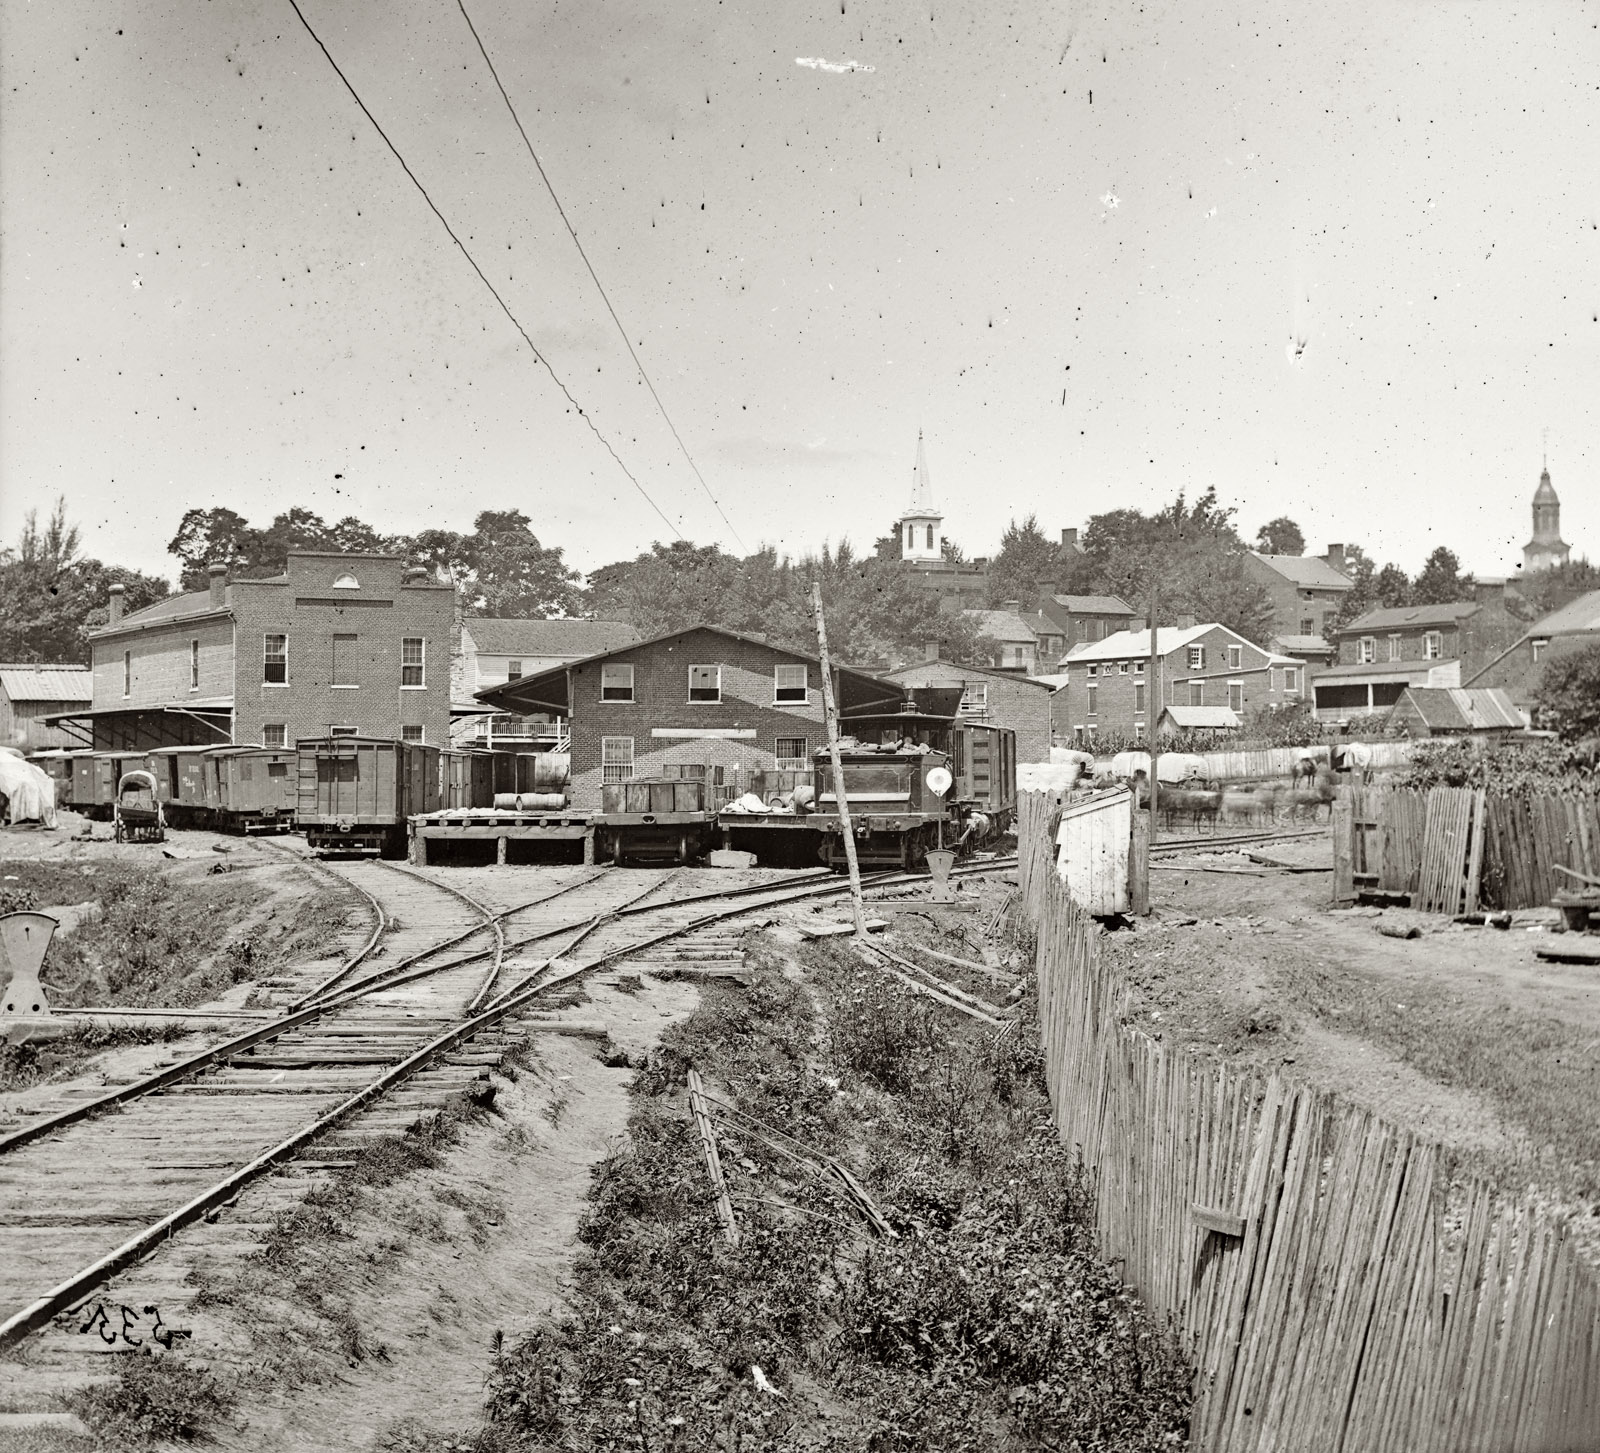 August 1862. "Culpeper Court House, Virginia. Railroad depot." Photographs from the main Eastern theater of war, Bull Run, second Battle of Bull Run. Wet plate negative, half of stereo pair, by Timothy O'Sullivan. View full size.